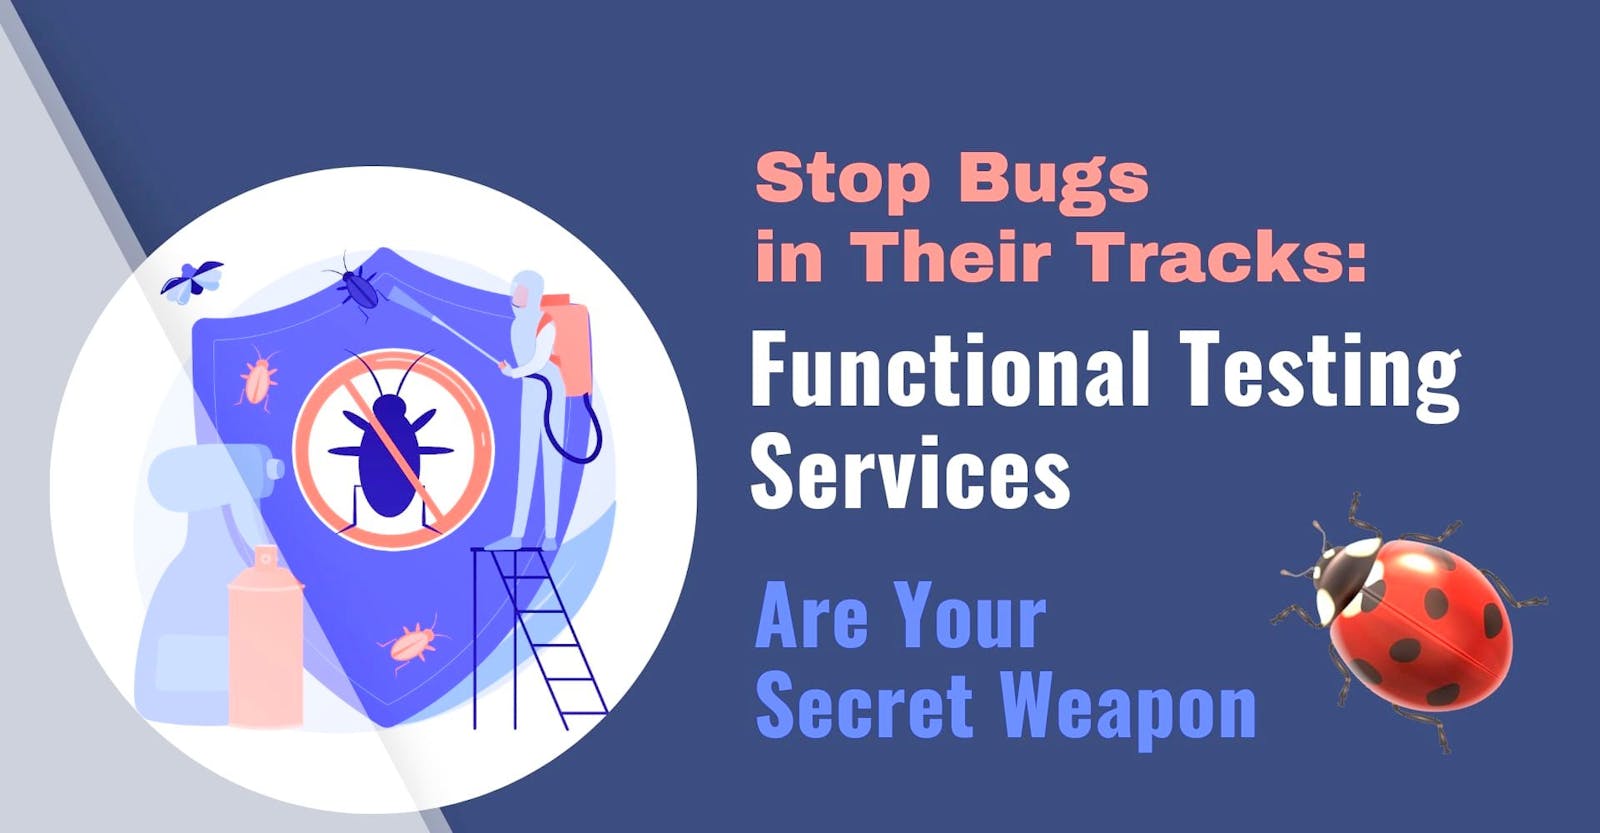 Catch bugs in their tracks: Functional testing services are your hidden power